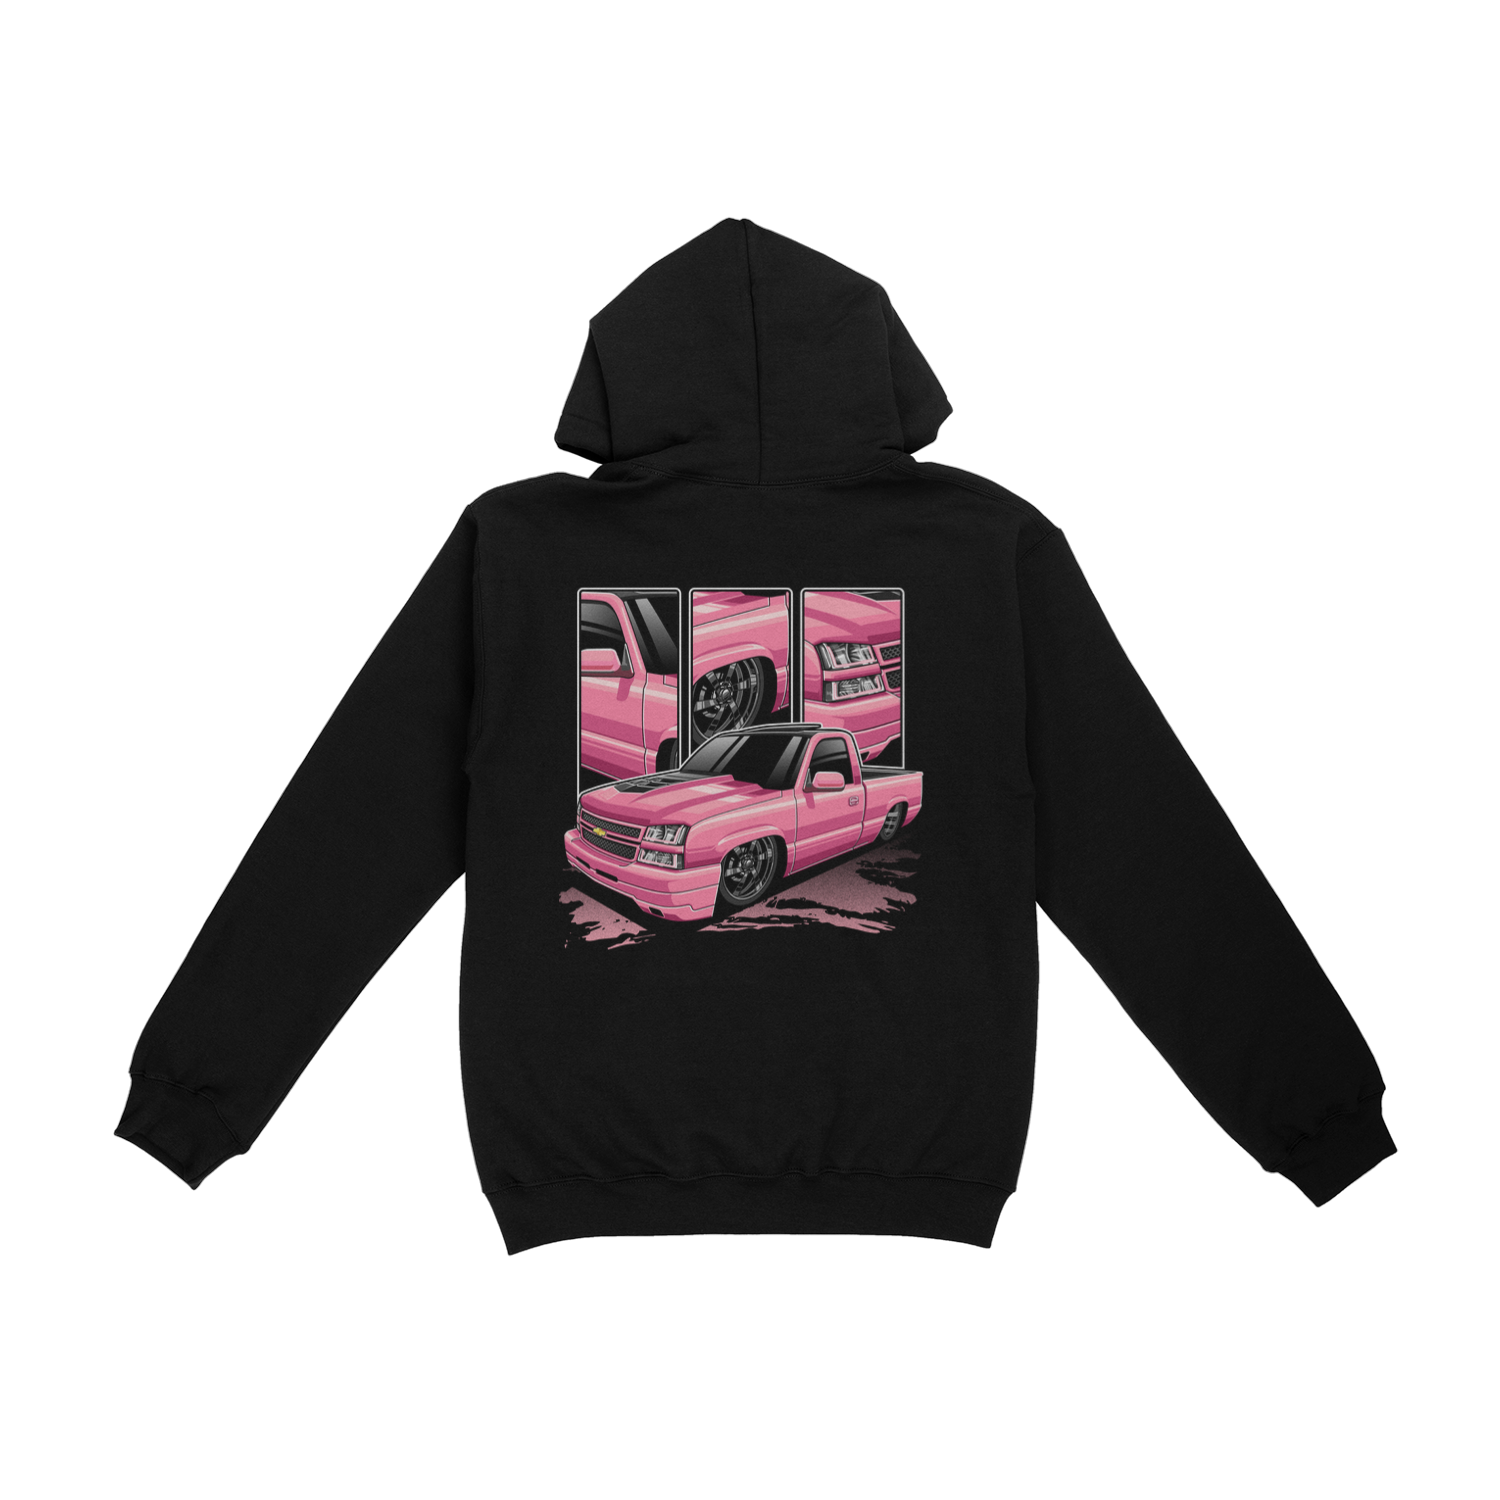 "Cotton Candy" Hoodie